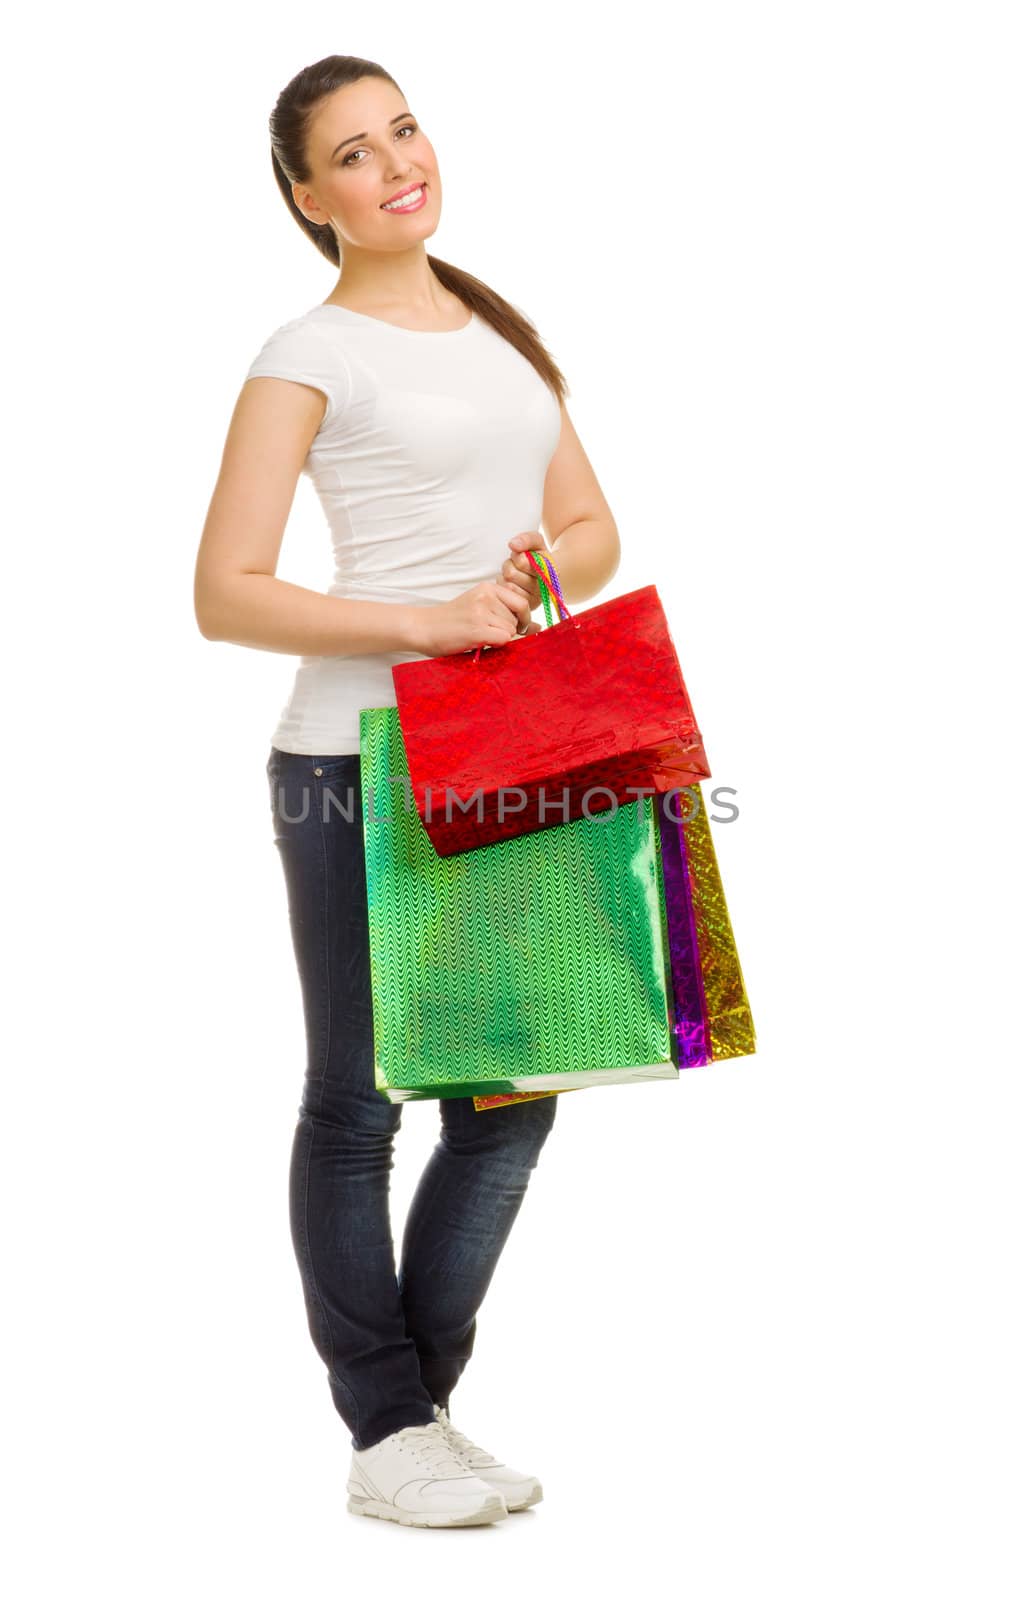 Young girl with bags by rbv